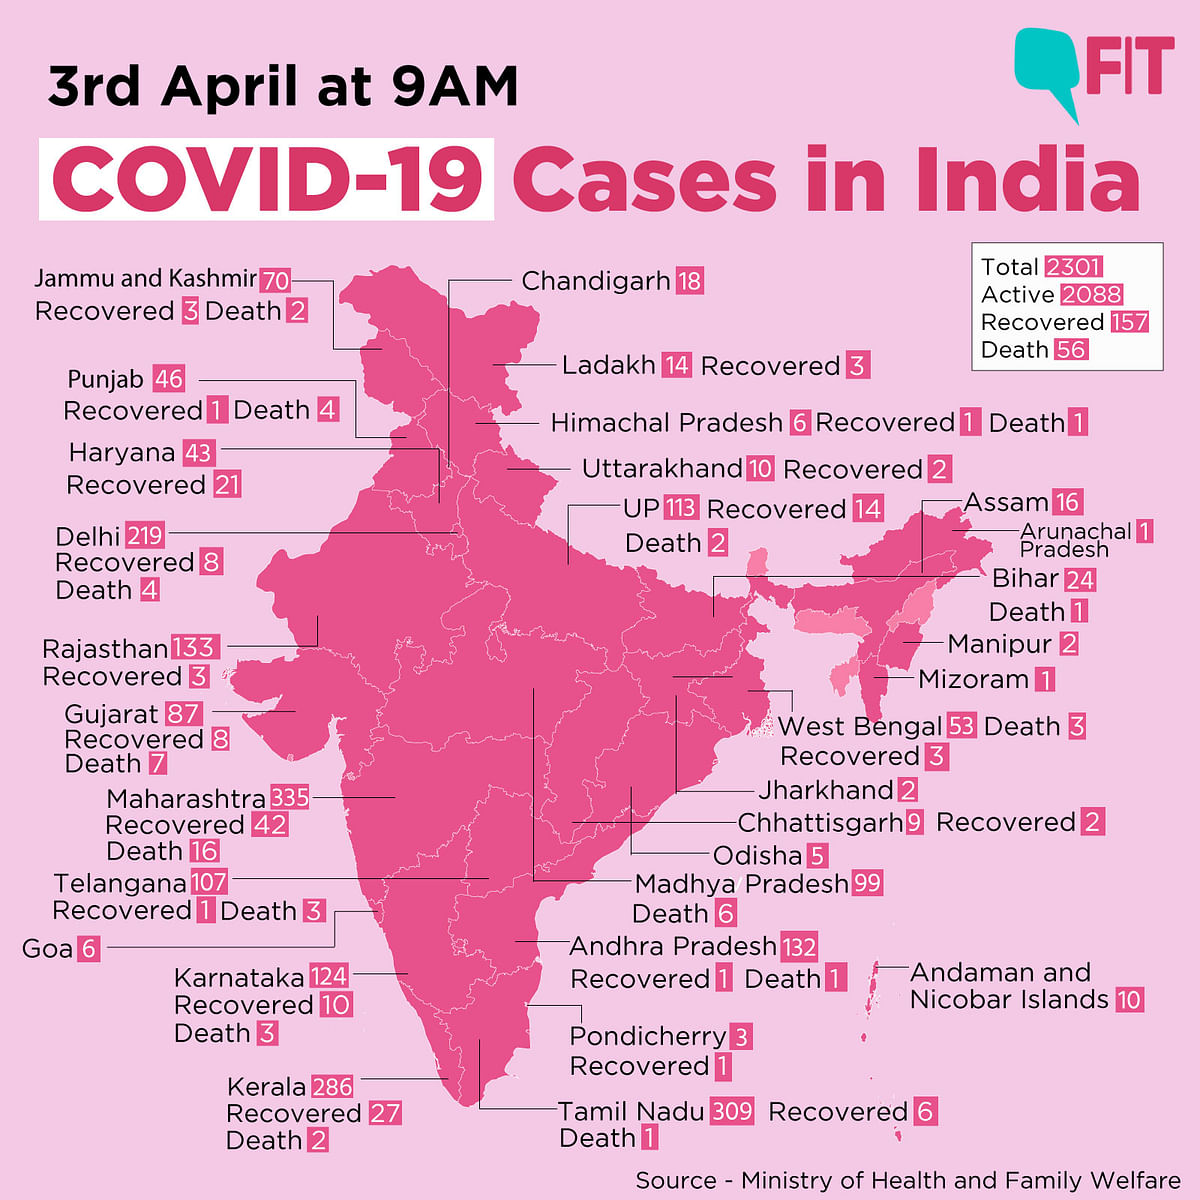 COVID-19 India Update: Cases Rise to 2,301, Deaths Toll at 56